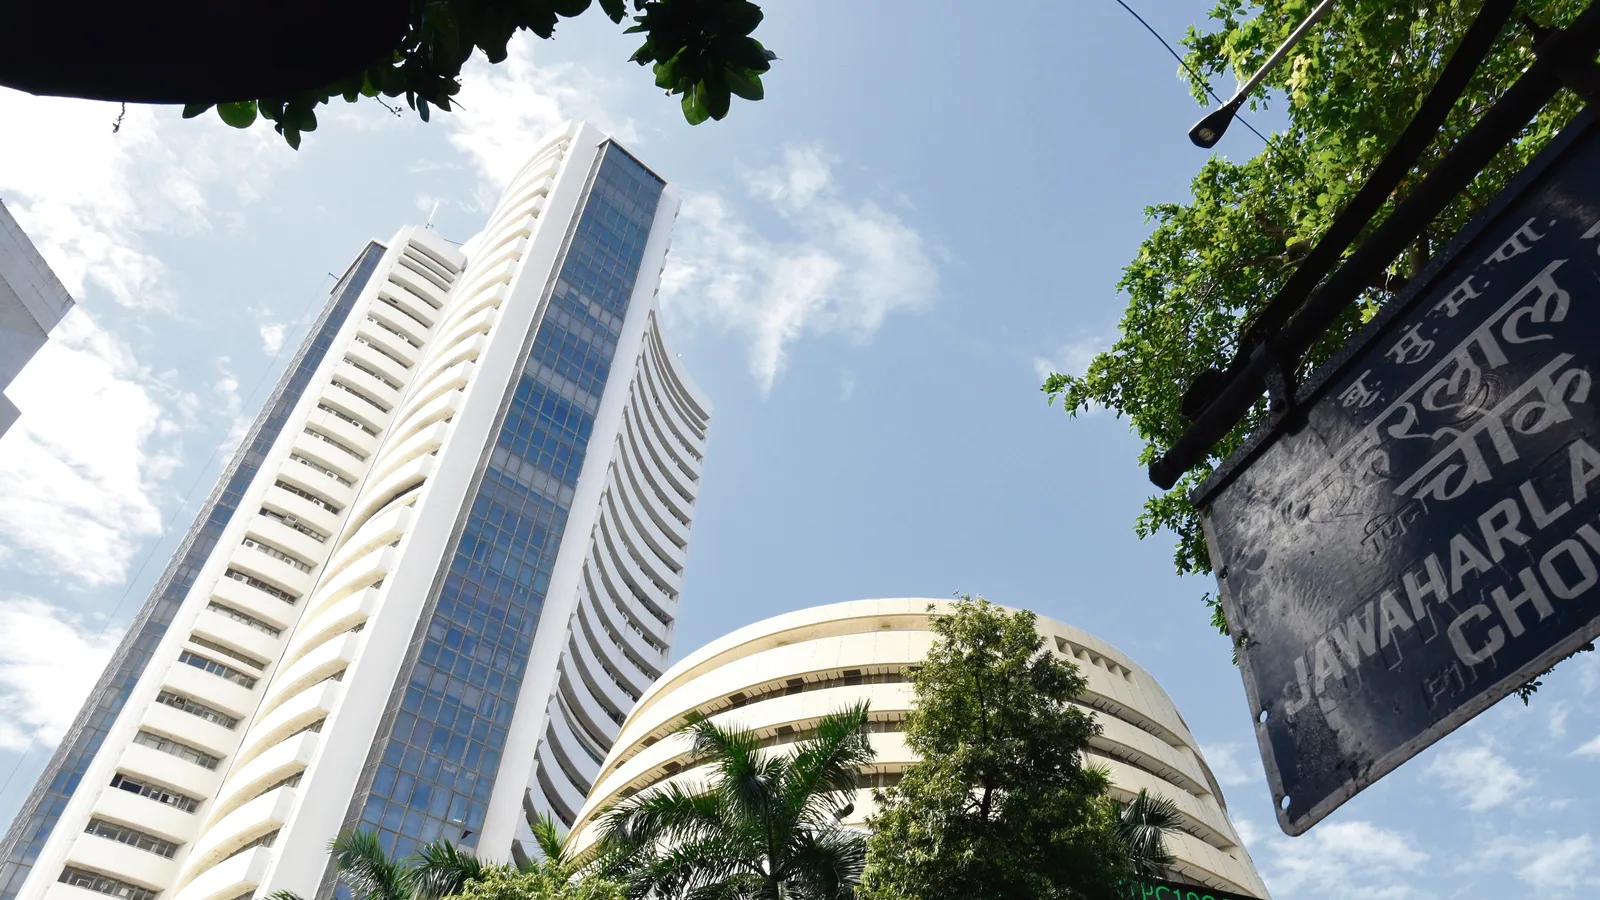 Sensex rises over 874 points to close at 57,912, Nifty ends day at 17,393